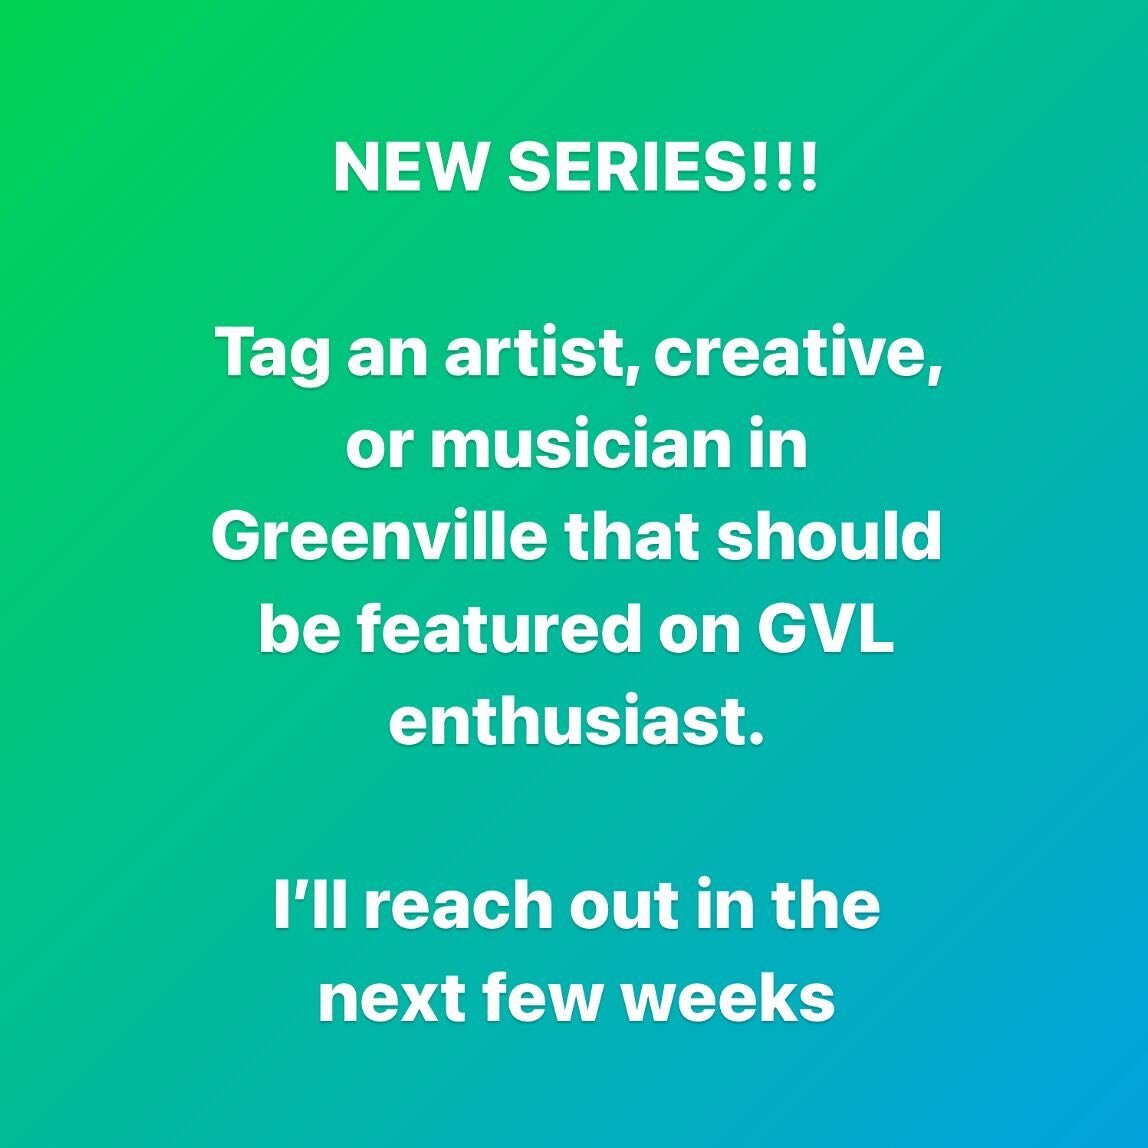 Your fave artist, creative, musician? Tag em! 👇#gvlenthusiast #gvltoday #gvldaily #greenville360 #gvlmusic #gvlsc